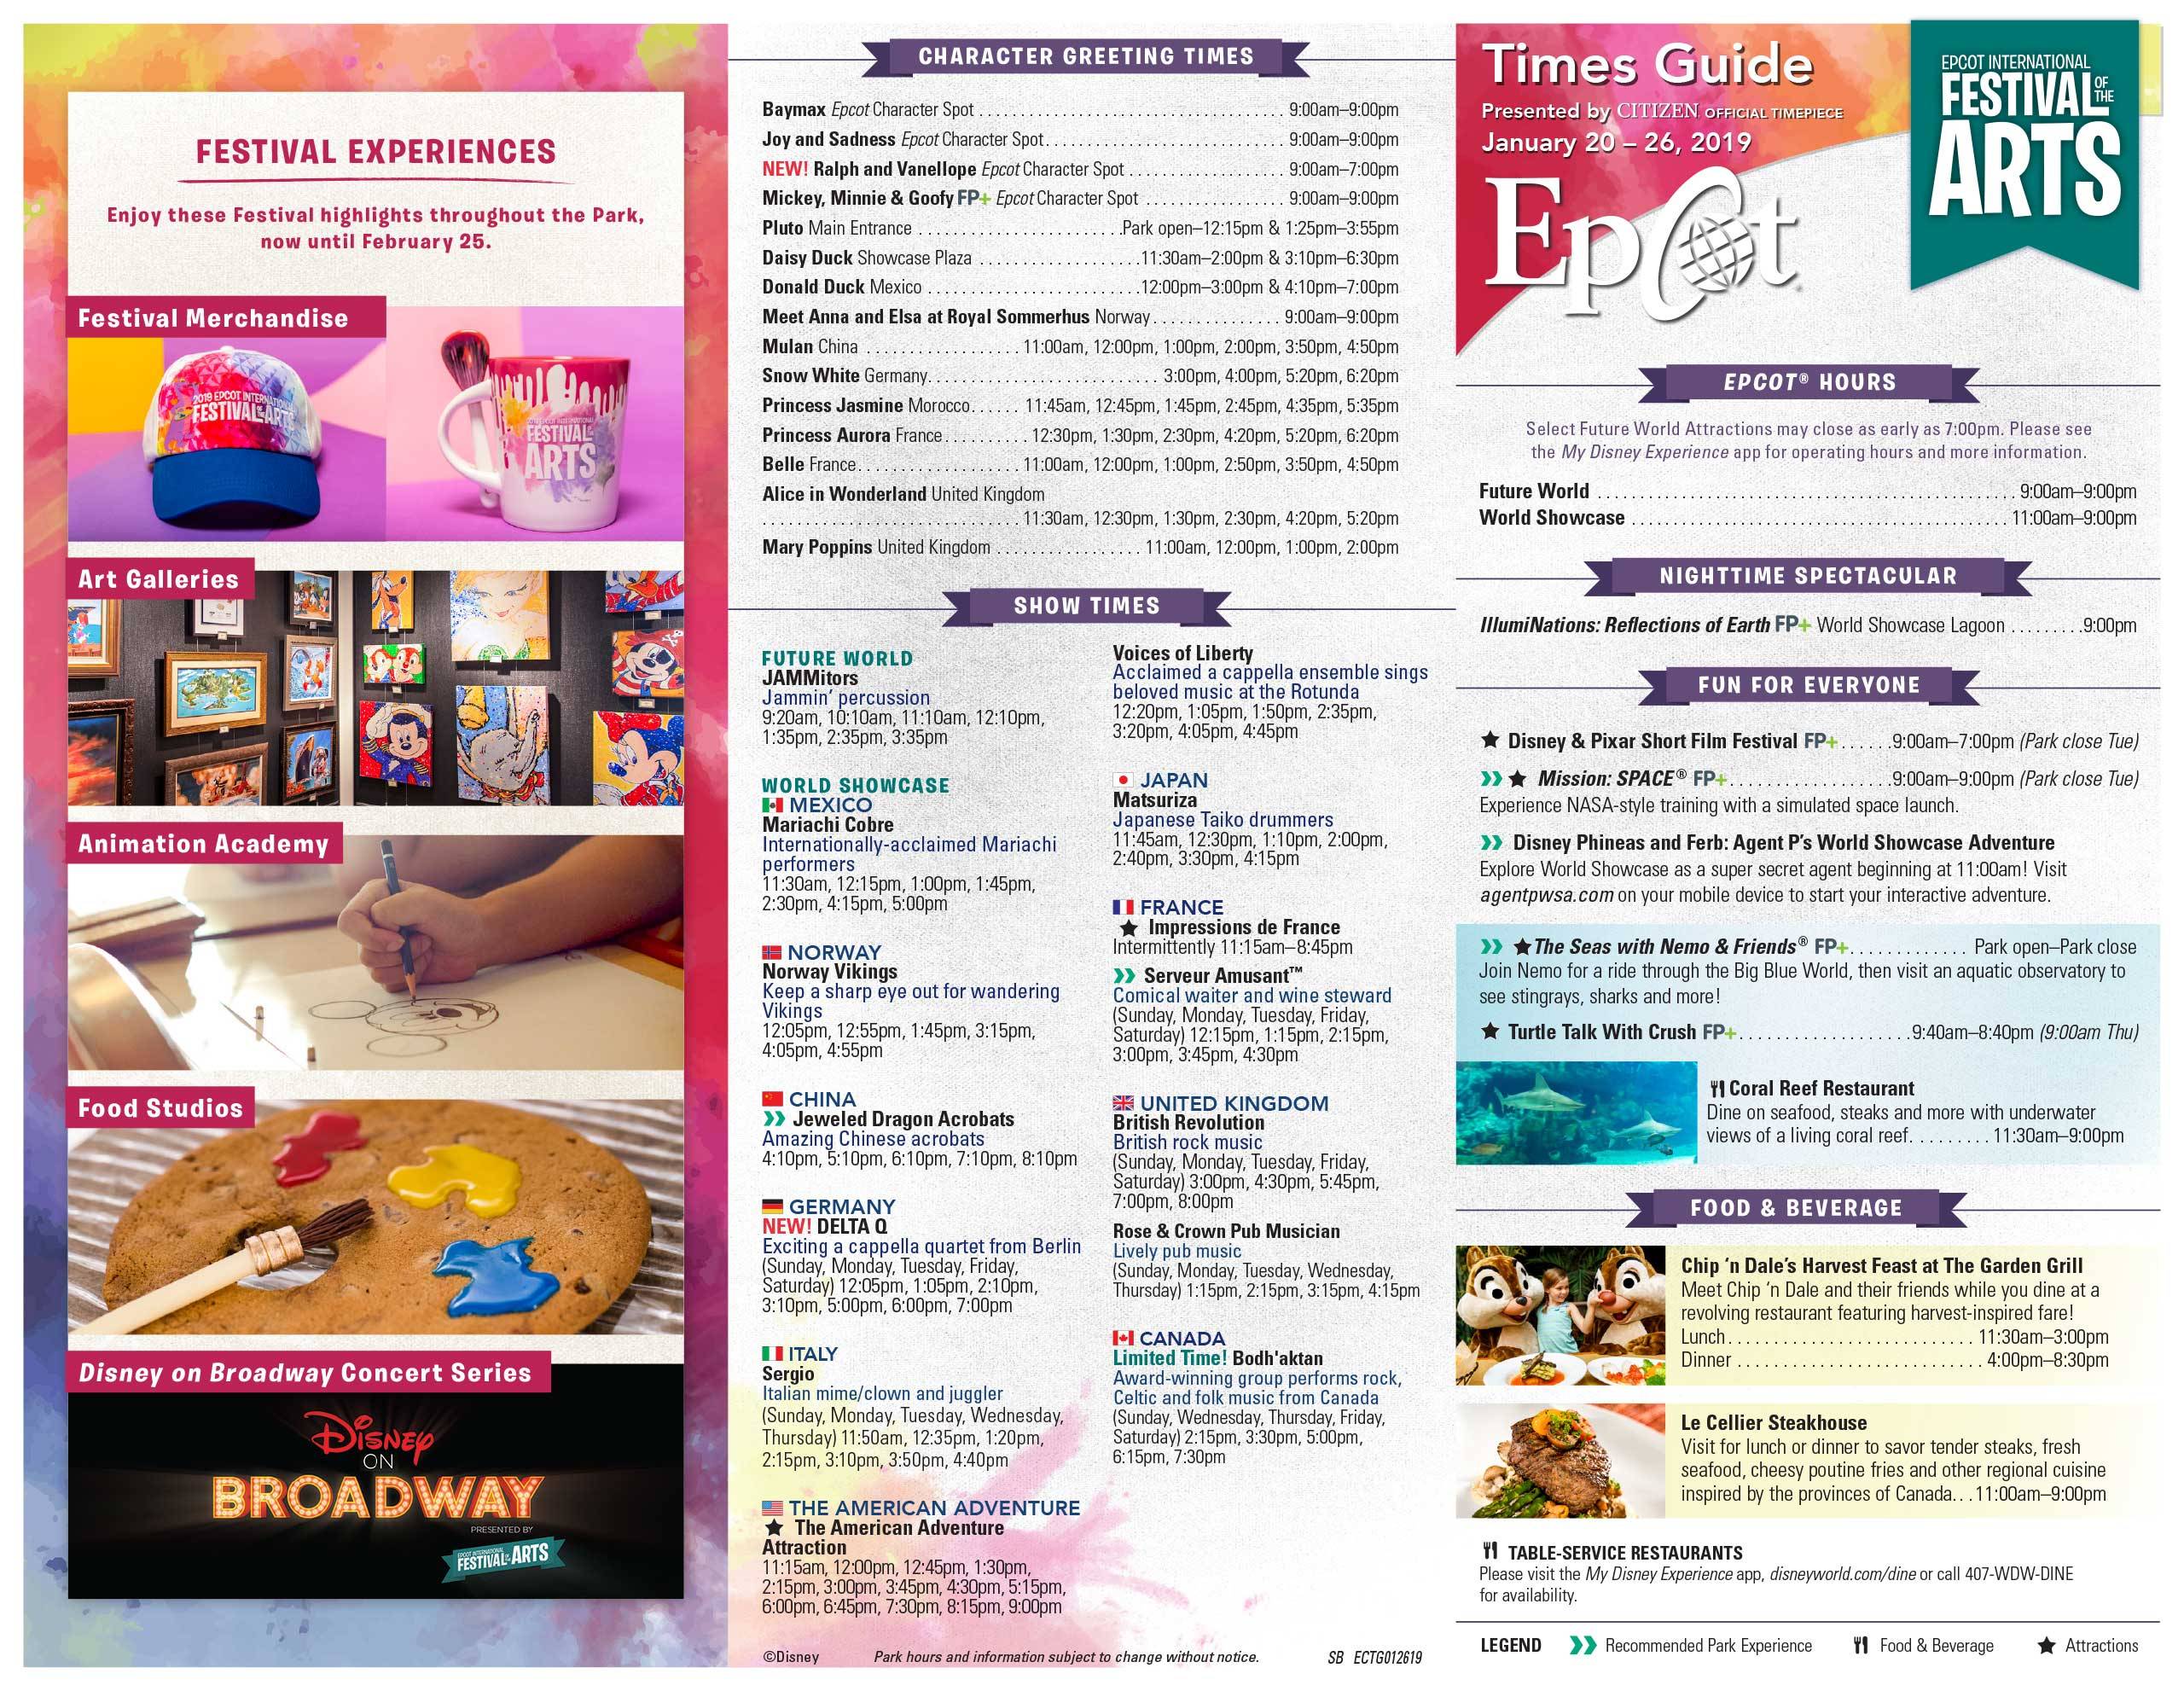 2019 Epcot Festival of the Arts times guide